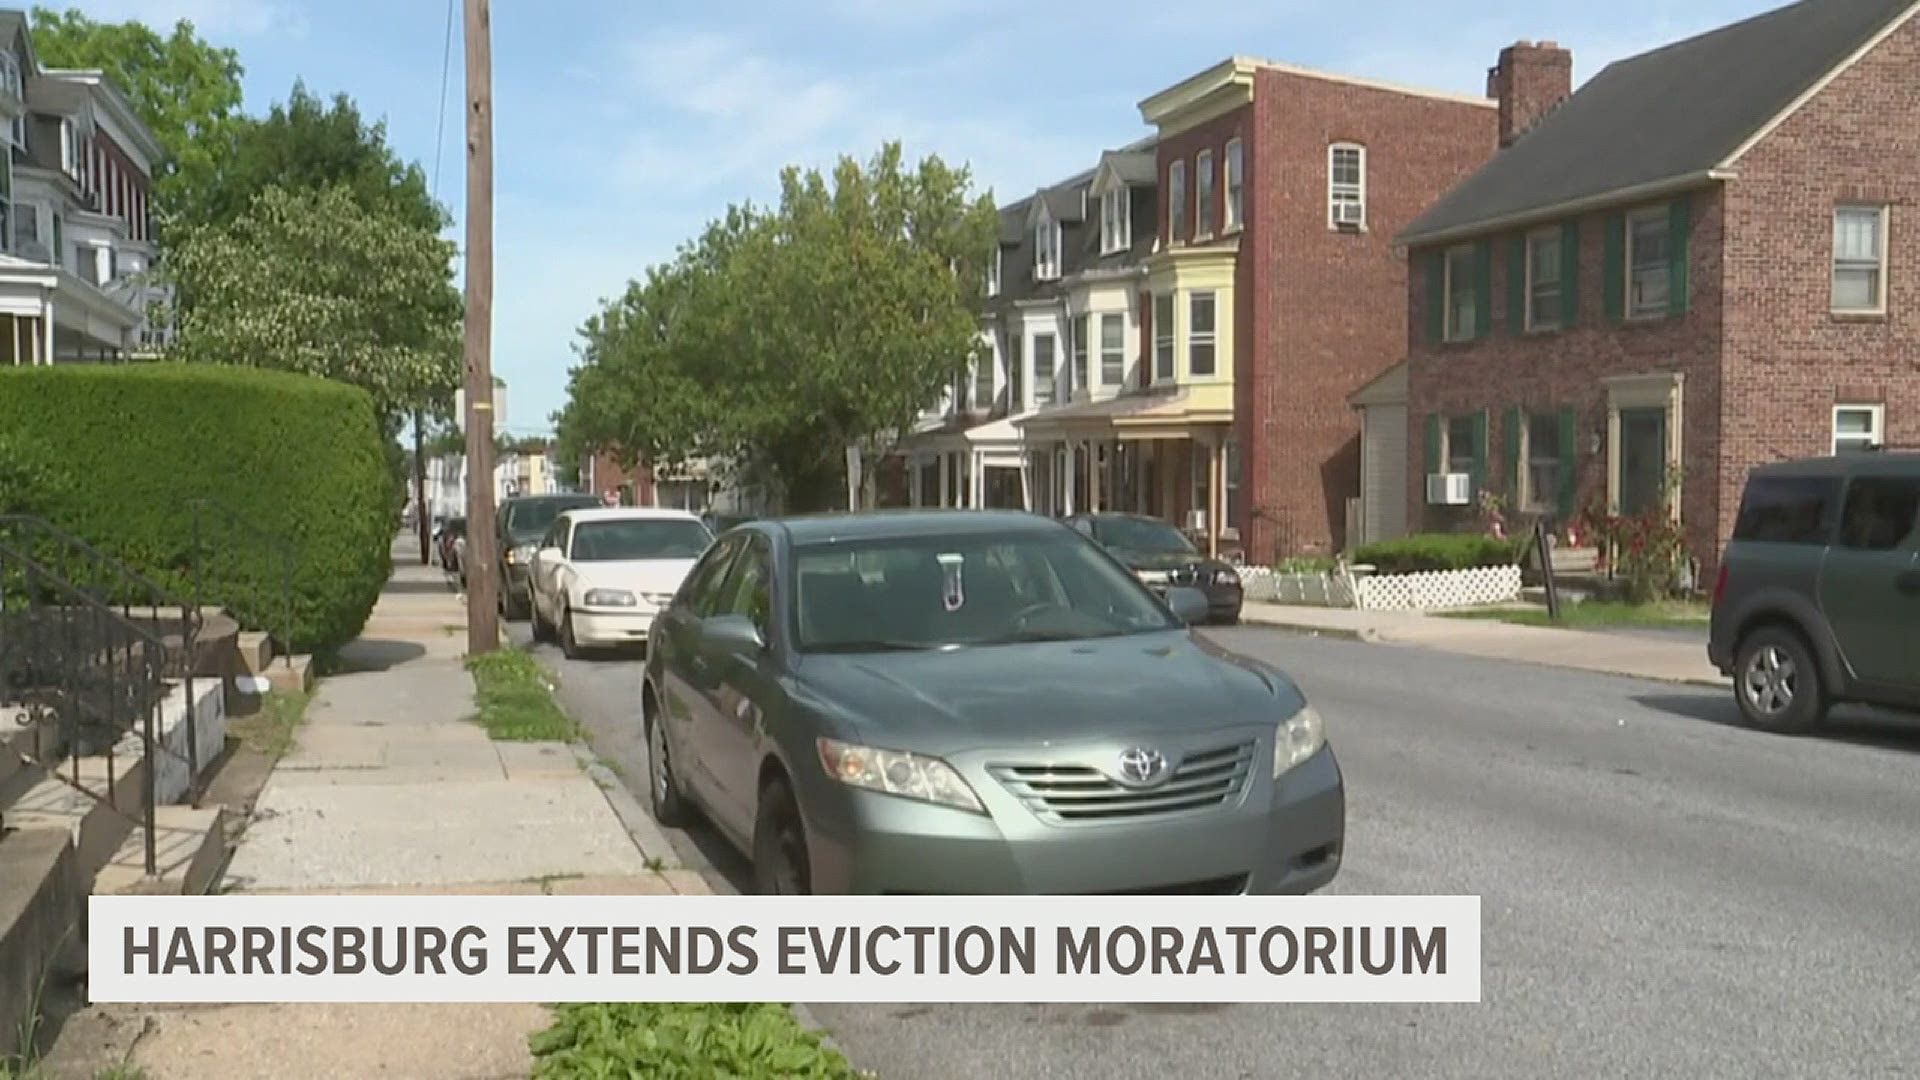 Harrisburg has again extended its eviction moratorium for 30 days, citing the hardships many are facing amid the pandemic.